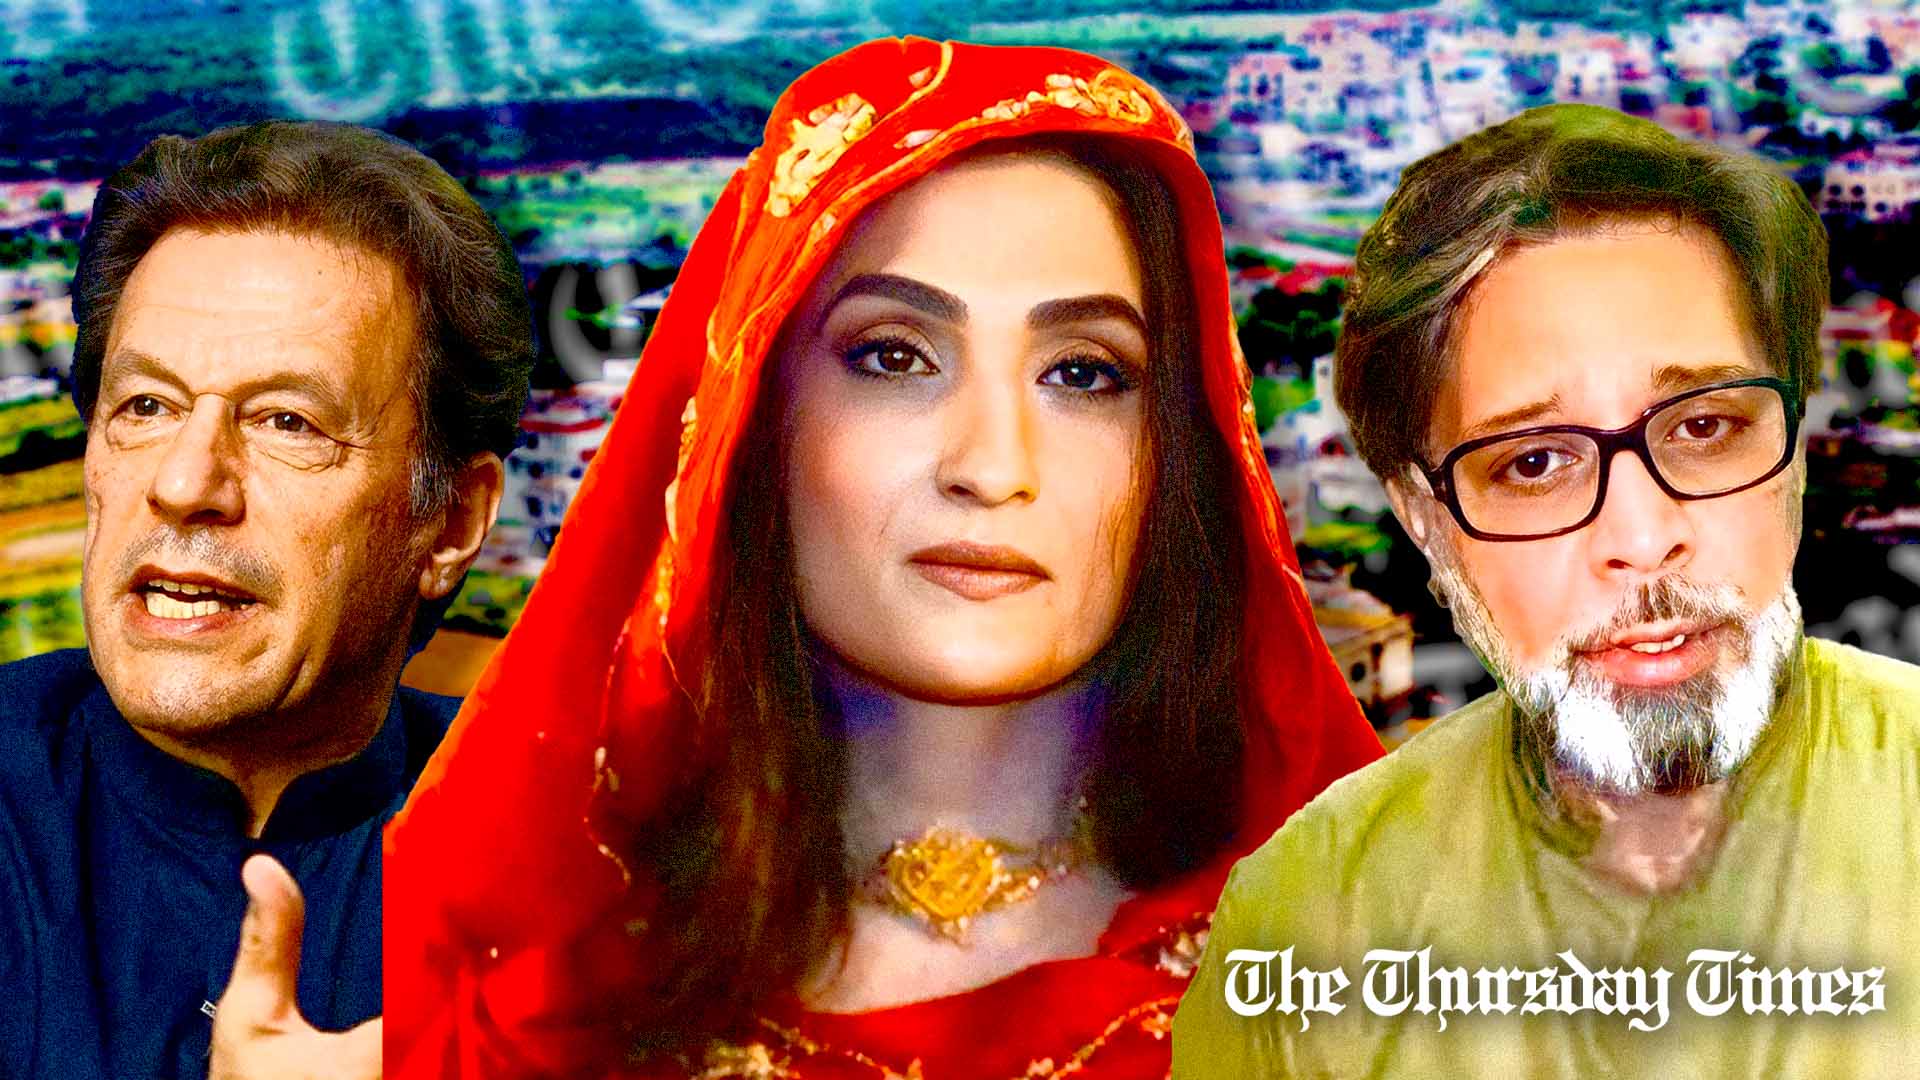 A combined file photo is shown of former prime minister and incumbent PTI supremo Imran Khan (L), former Pakistani first lady Bushra Maneka (C), and her ex-husband Khawar Maneka (R). — FILE/THE THURSDAY TIMES